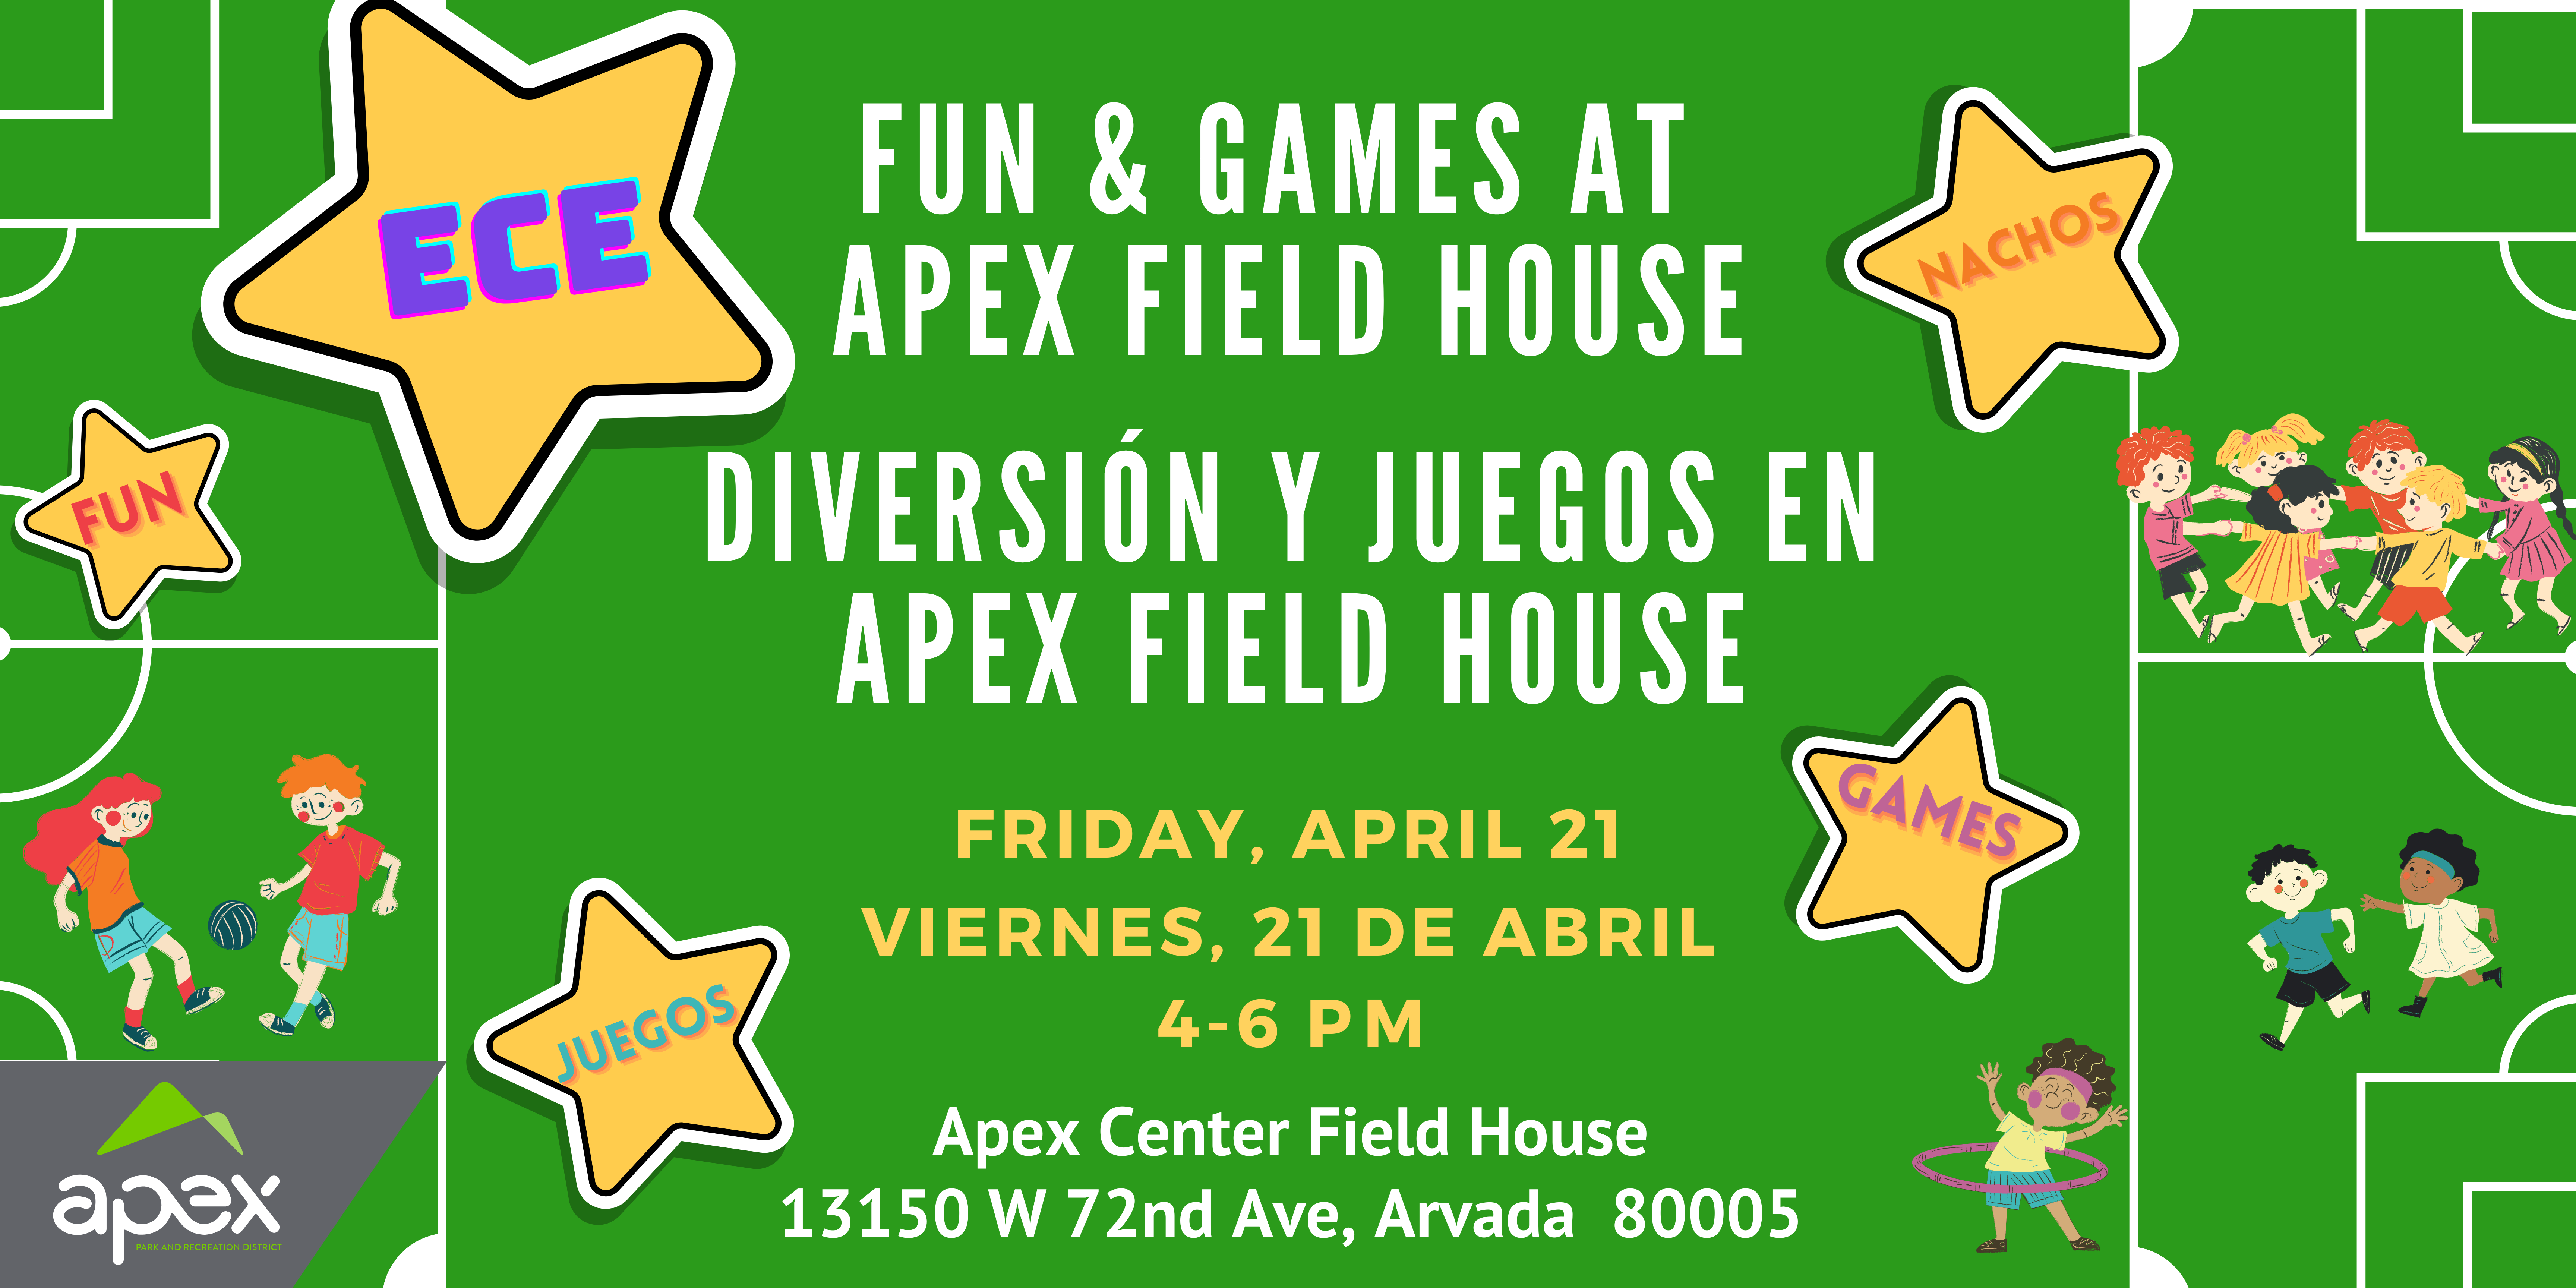 Background is a green sports field with children playing various games: soccer, tag, hula hoop. White text says, "Fun and Games at Apex Field House. Friday, April 21, 4-6pm. Apex Center Field House, 13150 W. 72nd Ave, Arvada 80005. Yellow stars say, "ECE (in purple), Nachos (in orange), Games (in pink), Juegos (in blue)."